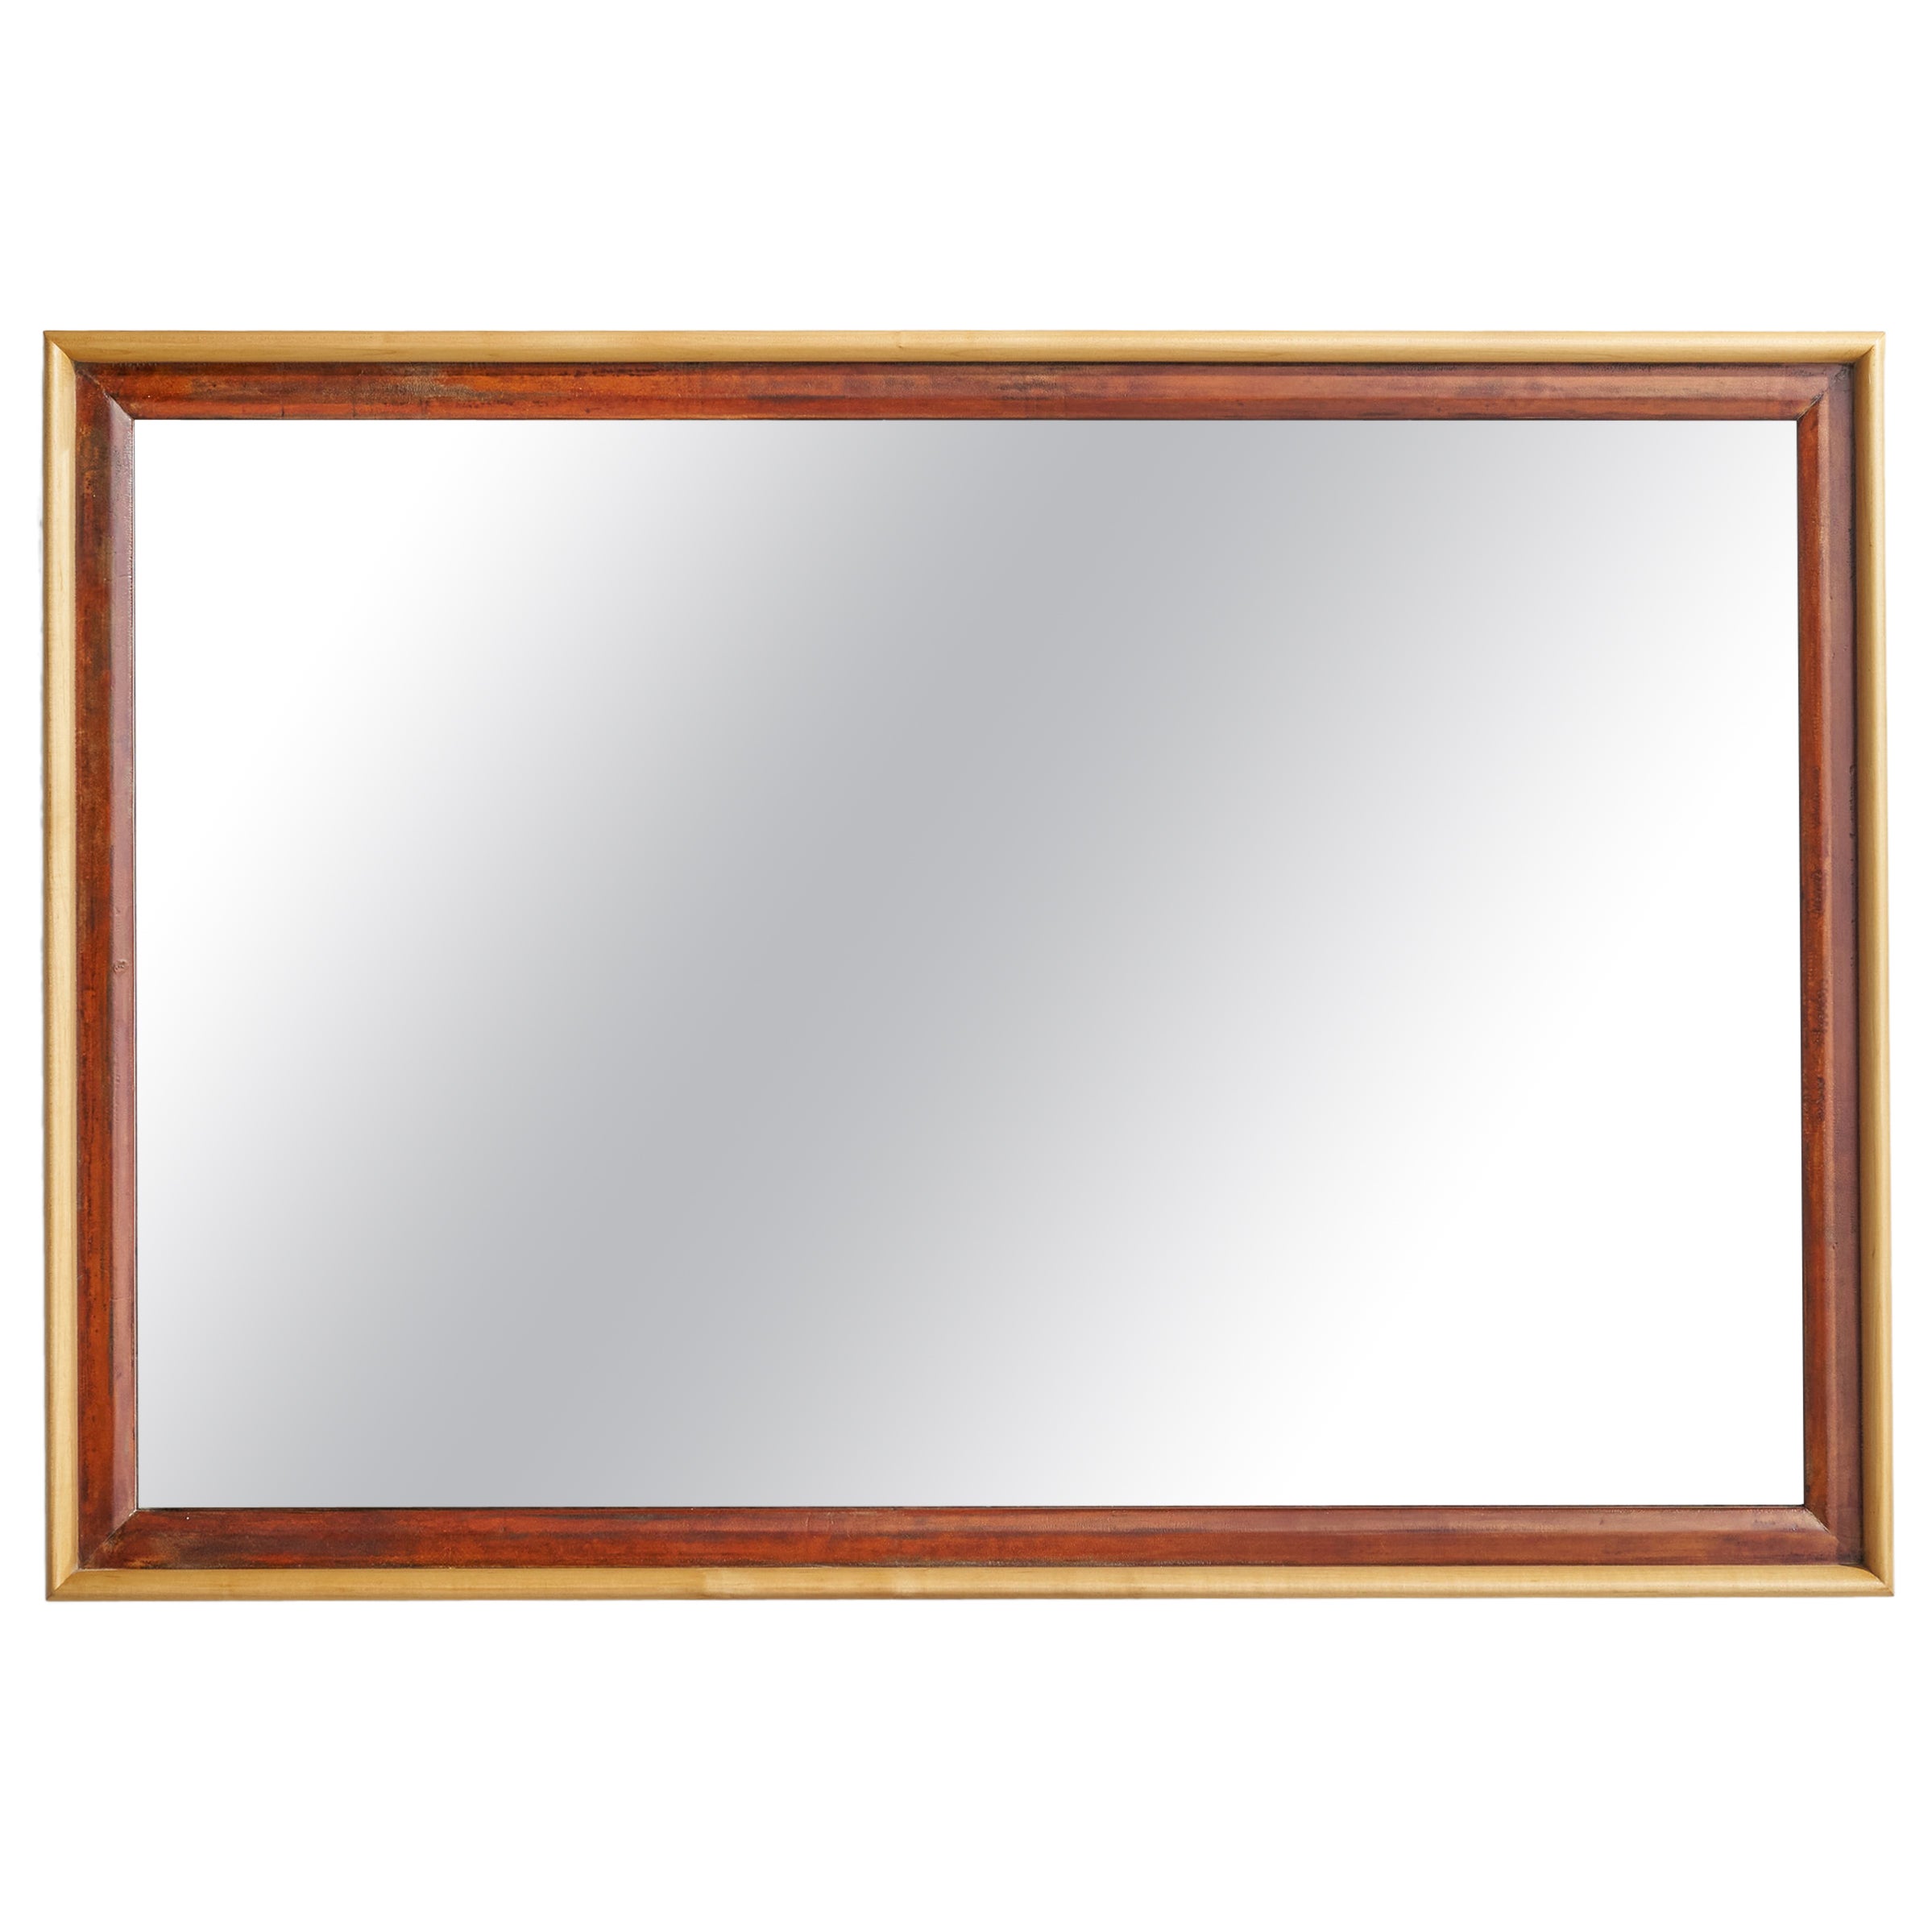 Paul Frankl, Large Station Wagon Mirror, Maple, Mahogany, USA, 1950s For Sale